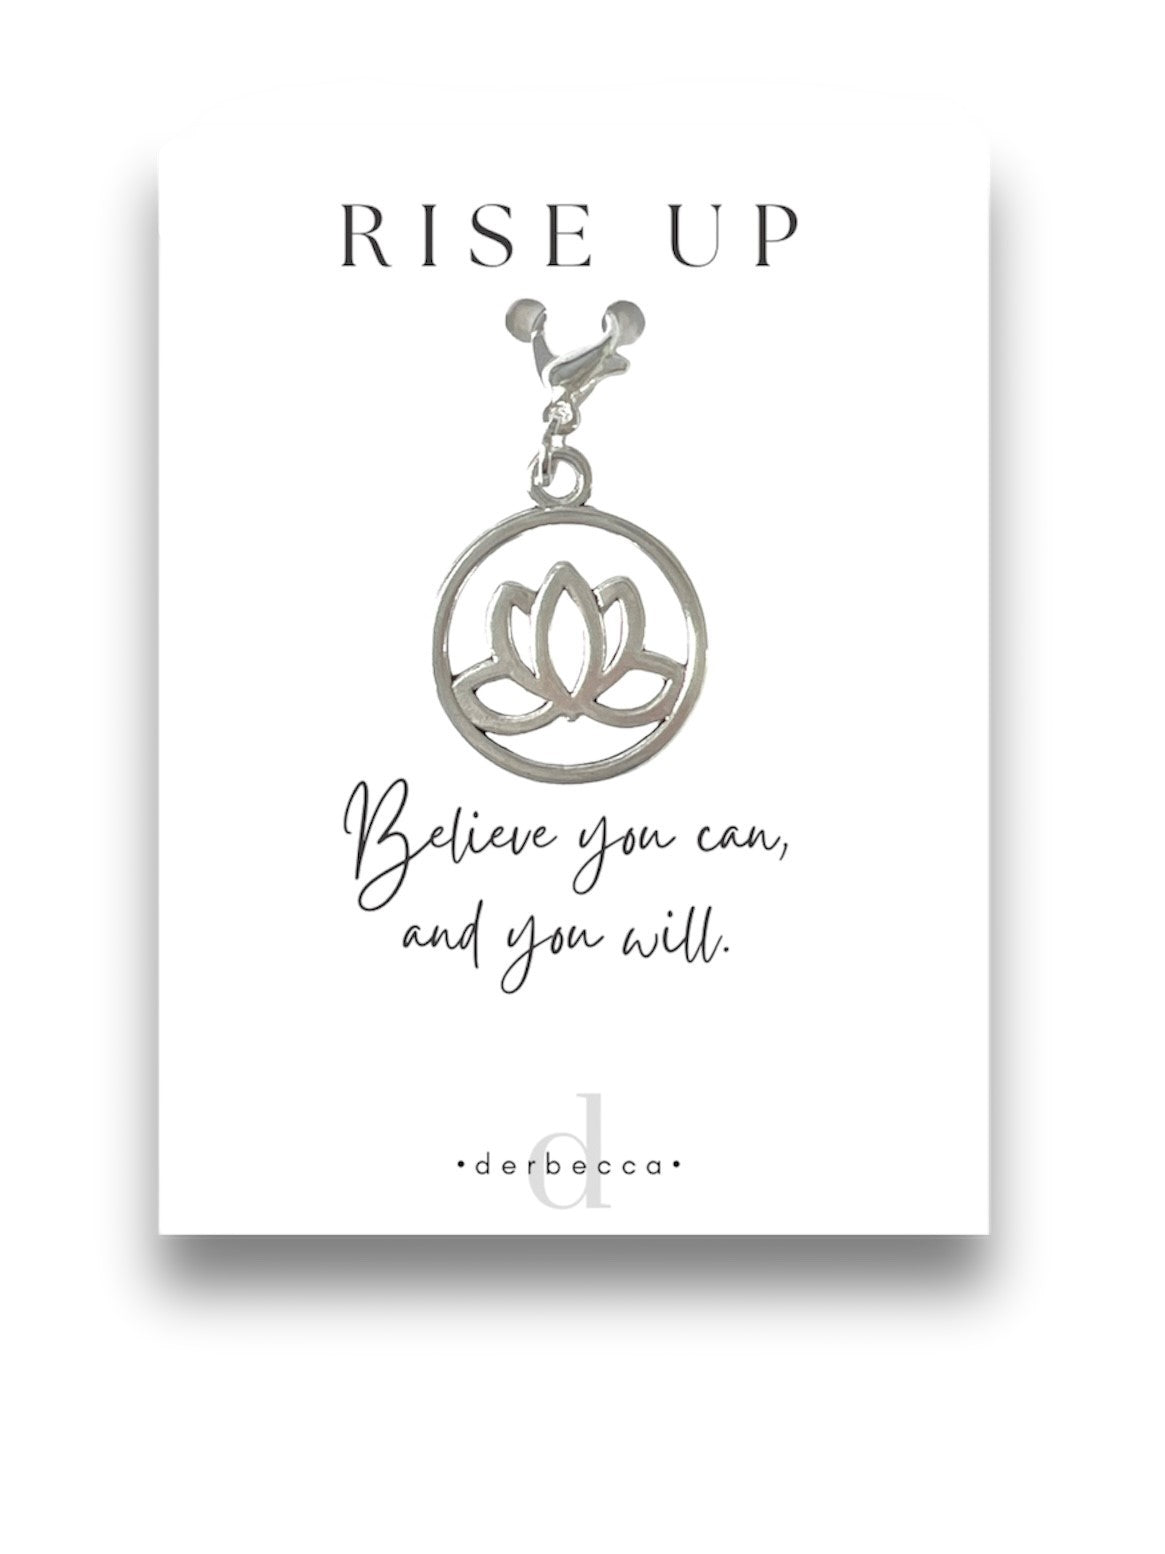 Motivational Support Gift Lotus Flower Charm Jewelry Pendant Zipper Pull Clip-On Charm Clip Accessory Lobster Claw Clasp with Poem Verse Inspirational Saying Card: RISE UP Believe you can, and you will.